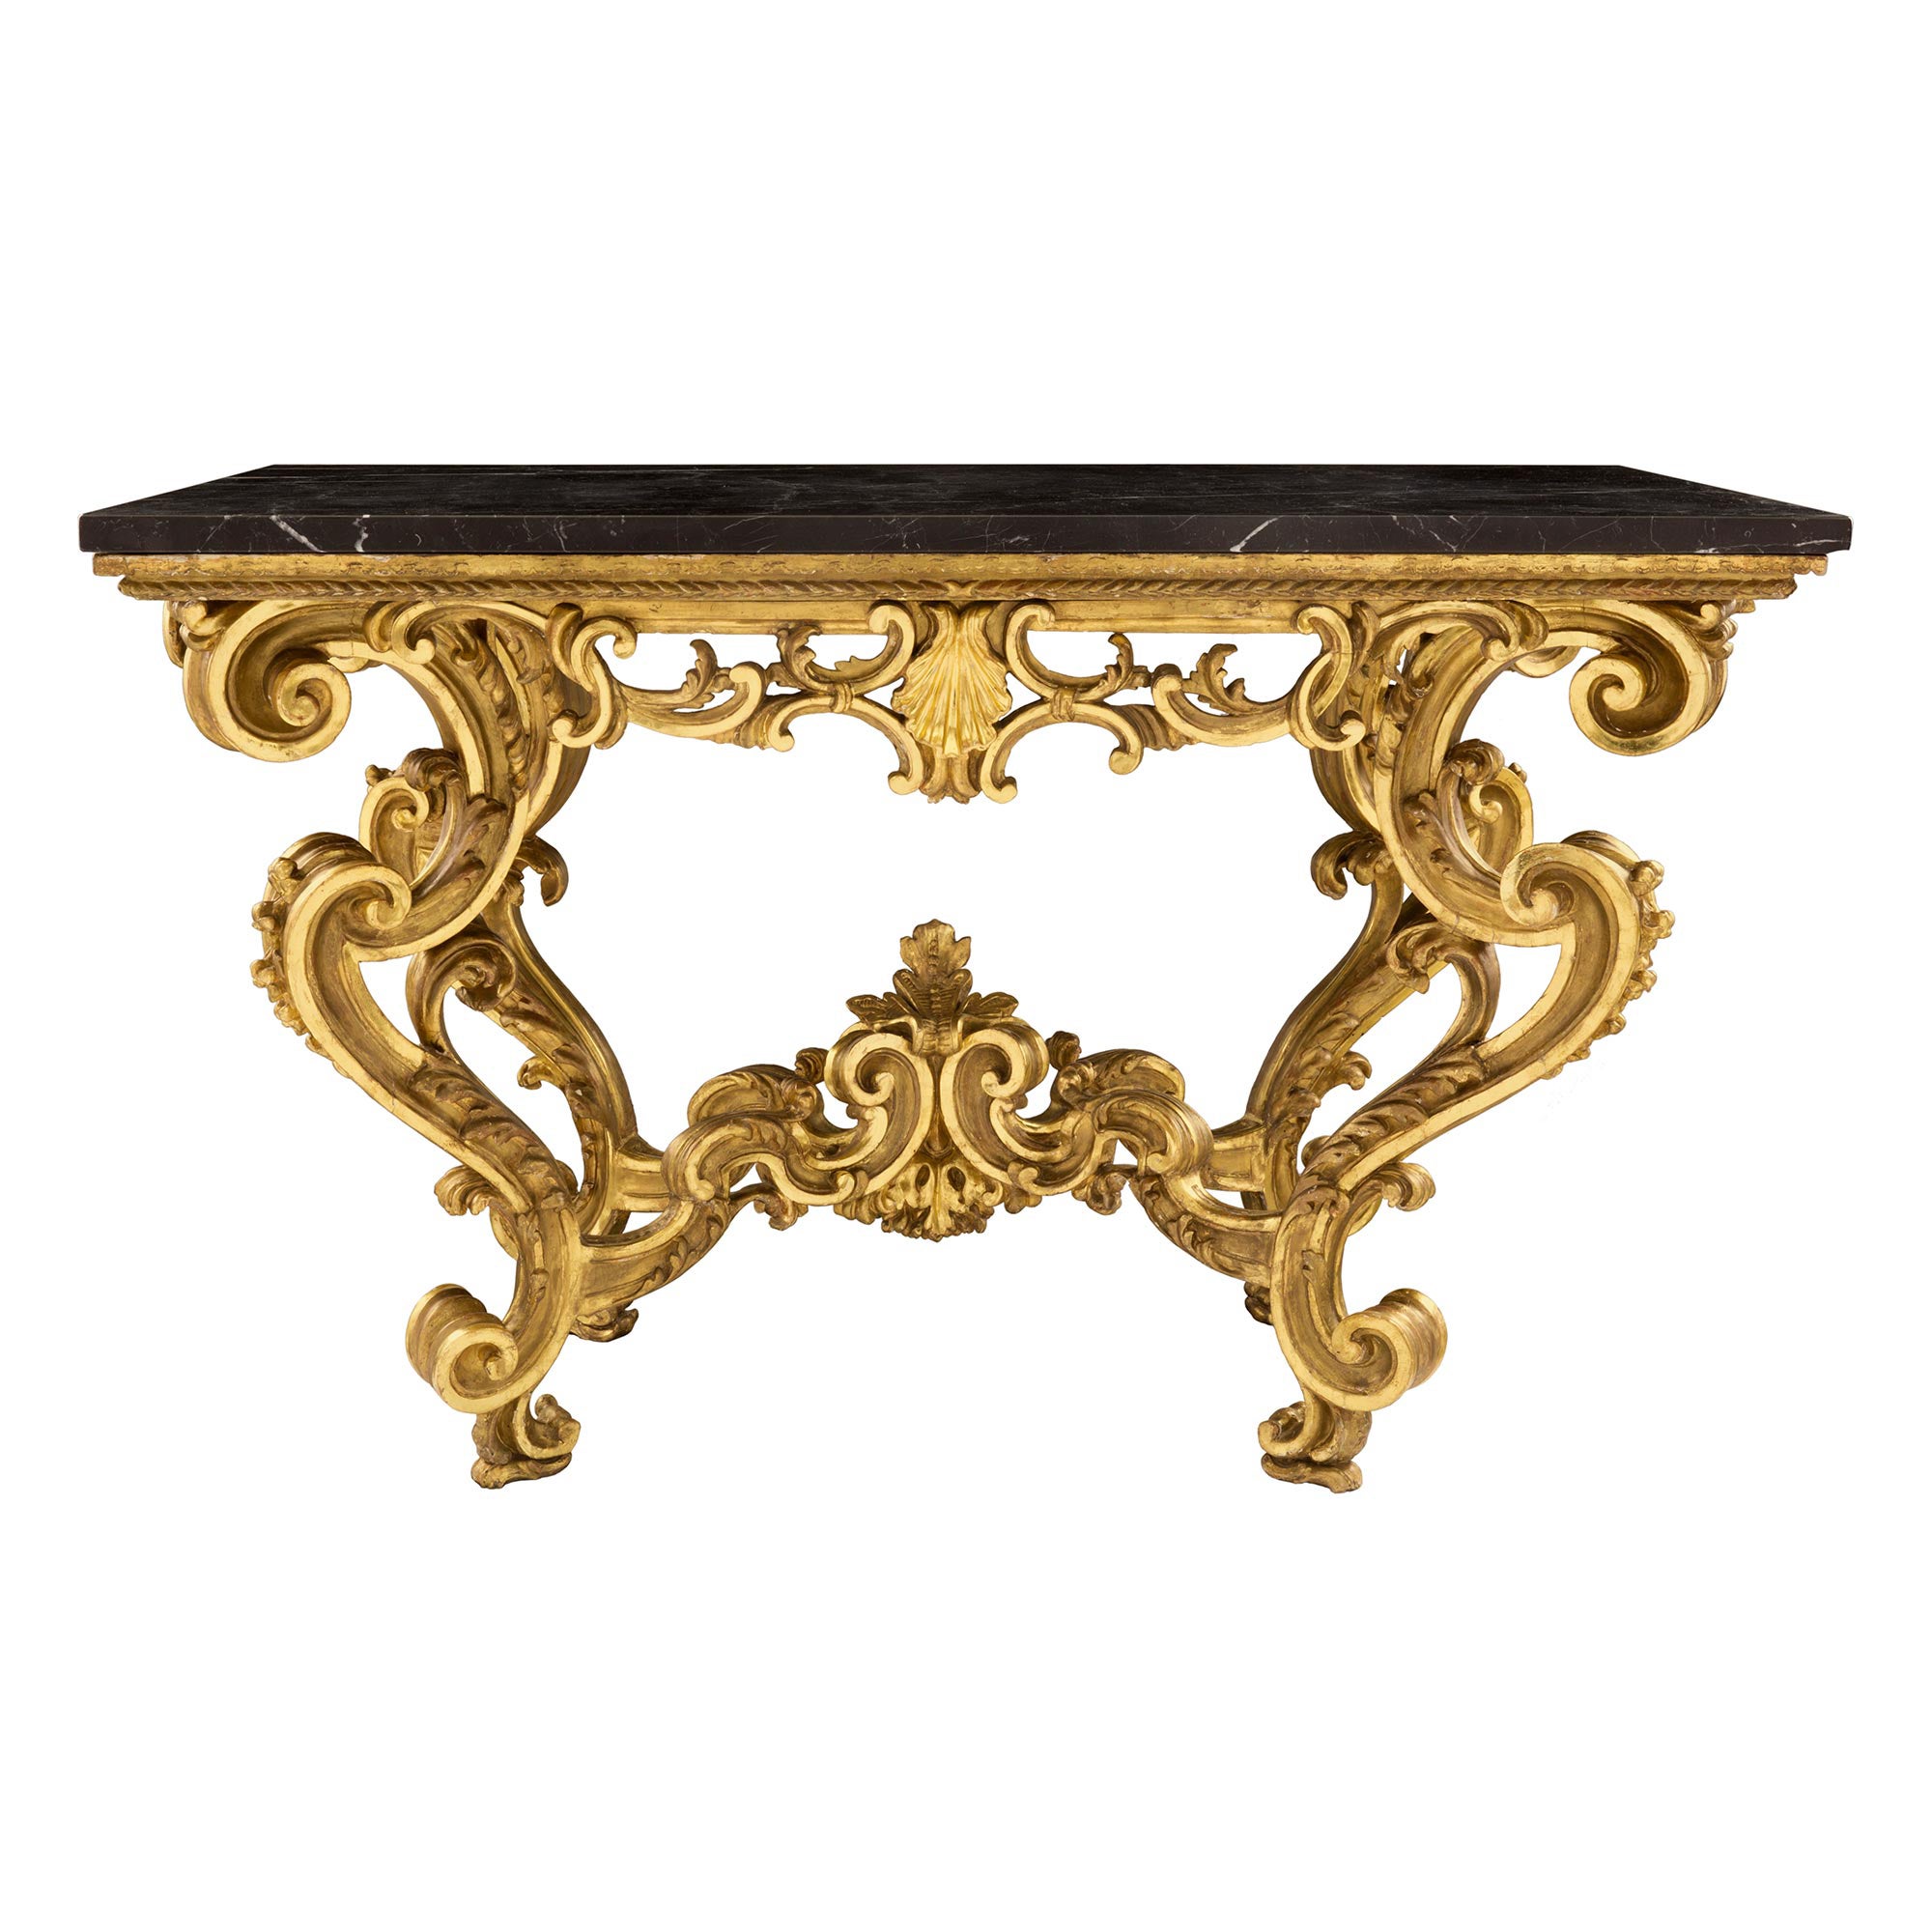 Italian 18th Century Louis XIV Period Giltwood and Marble Console